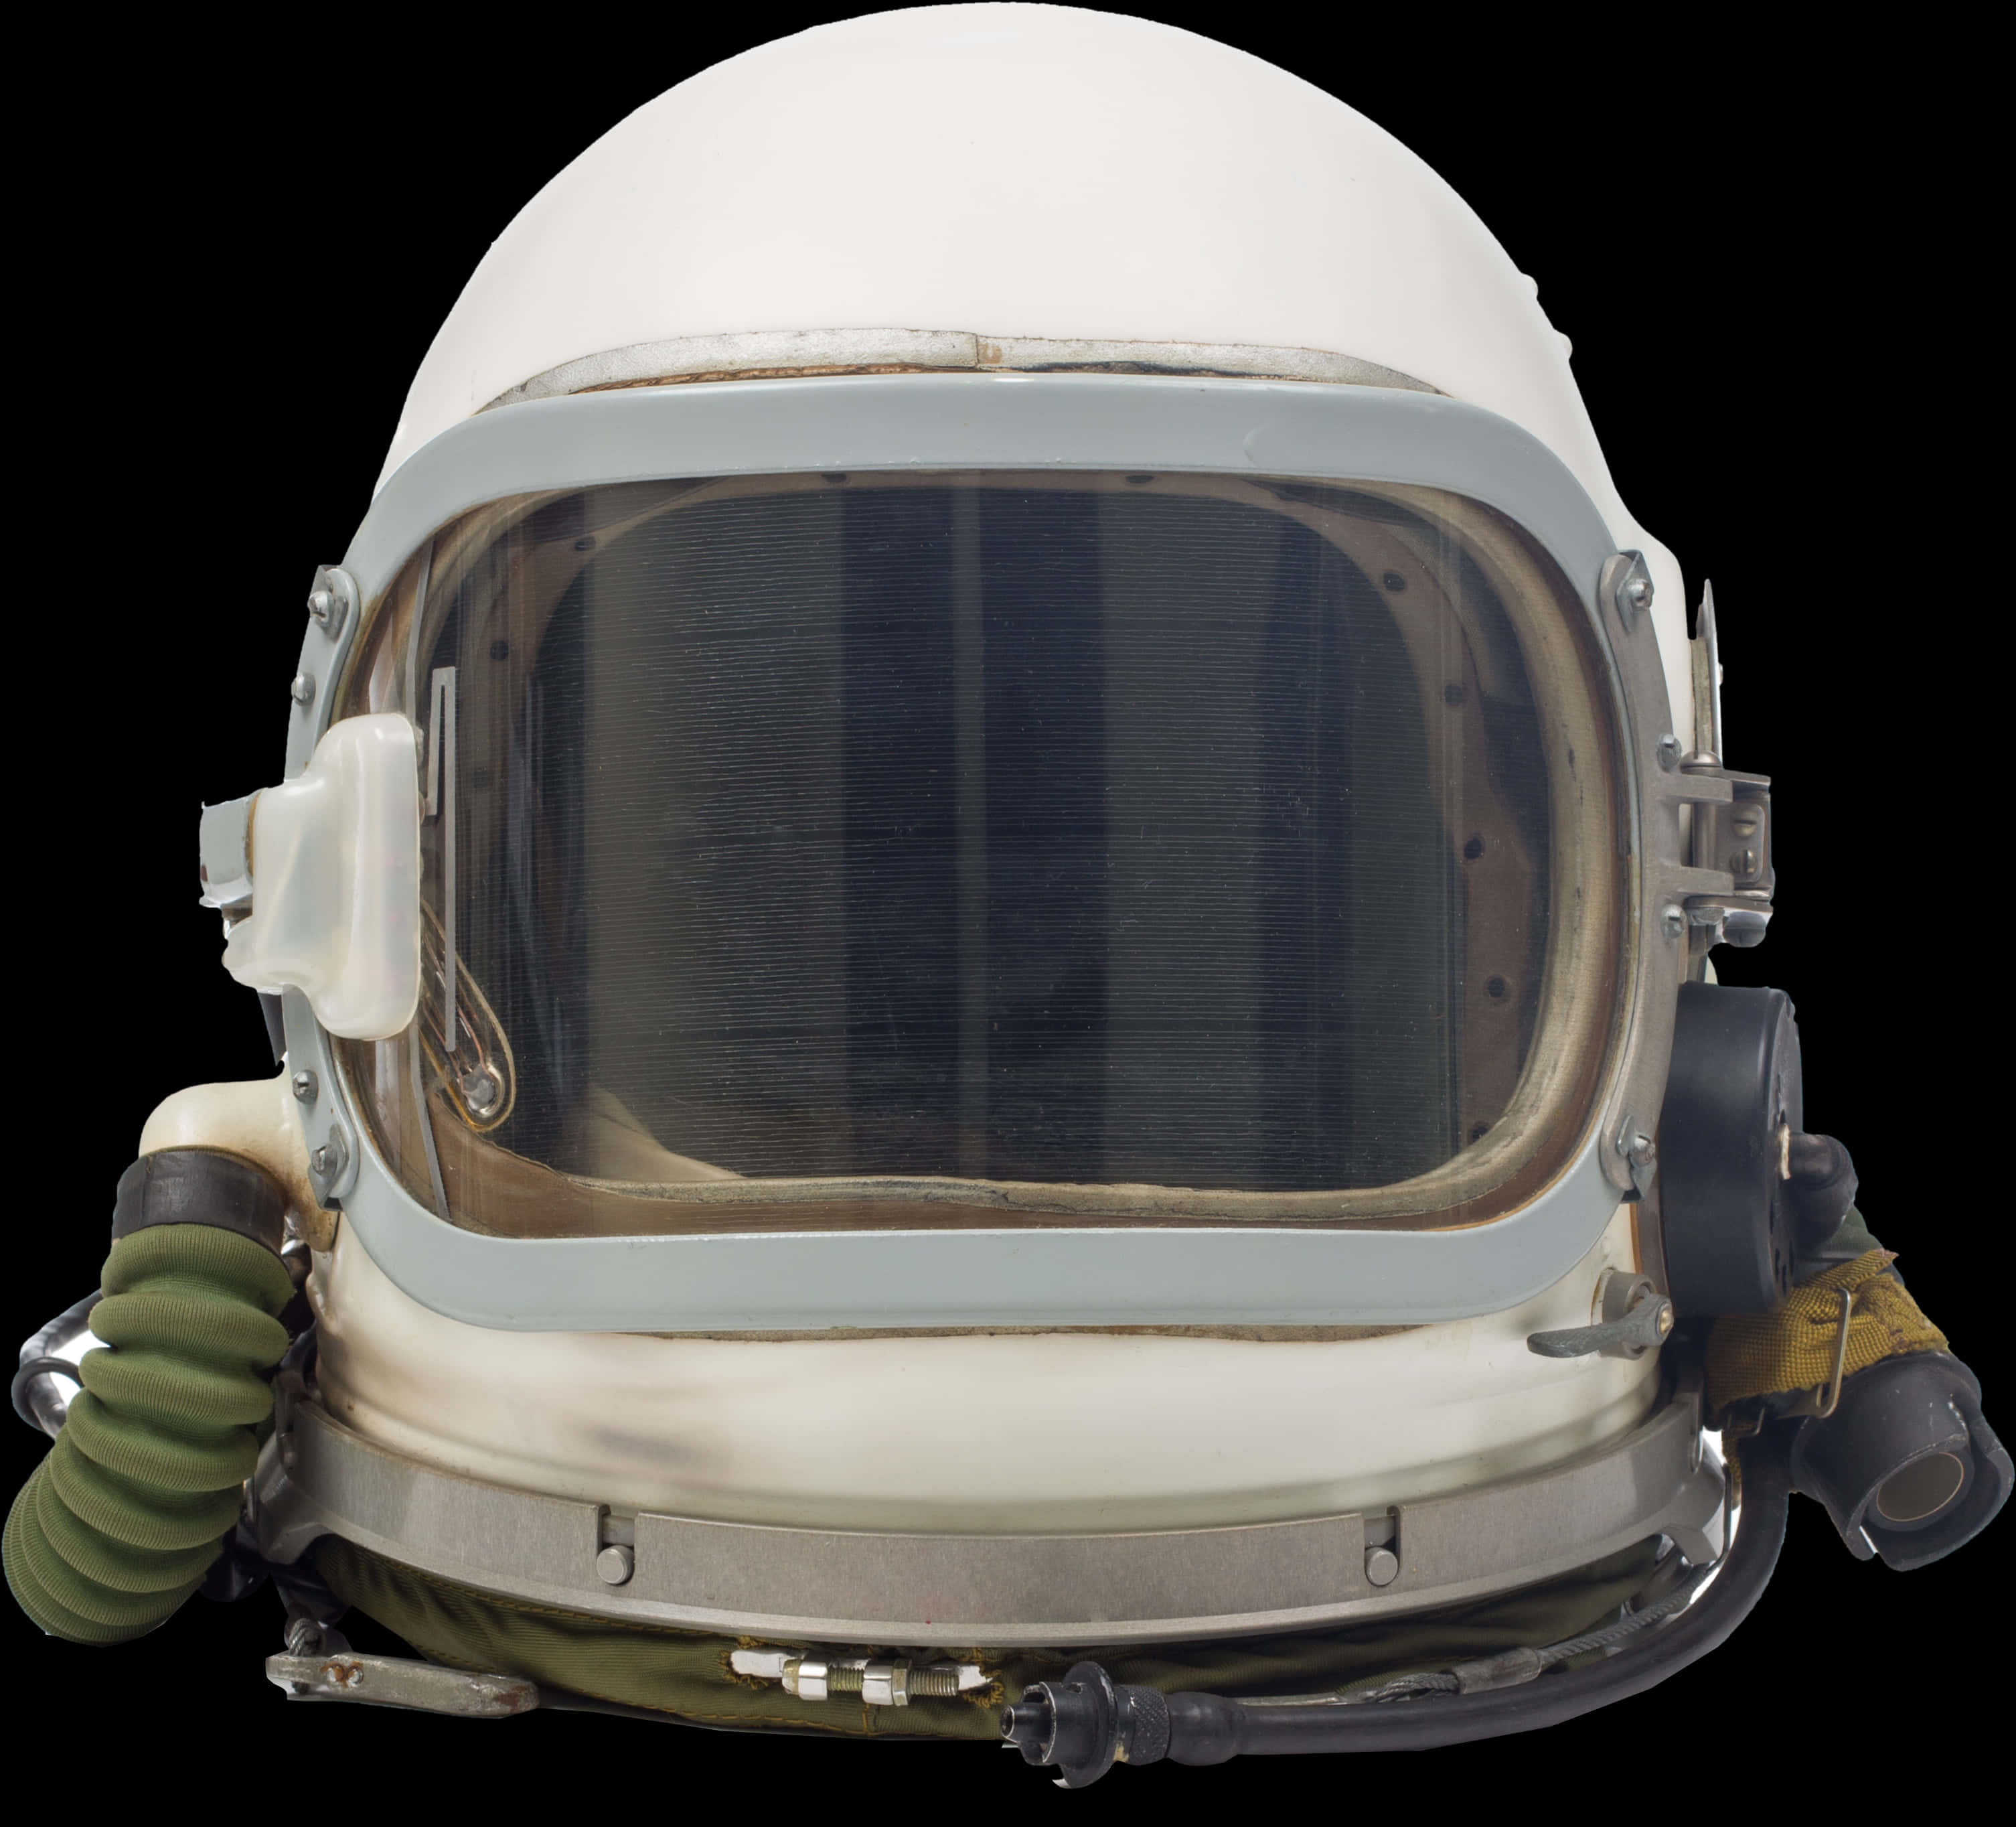 A White Helmet With A Clear Visor